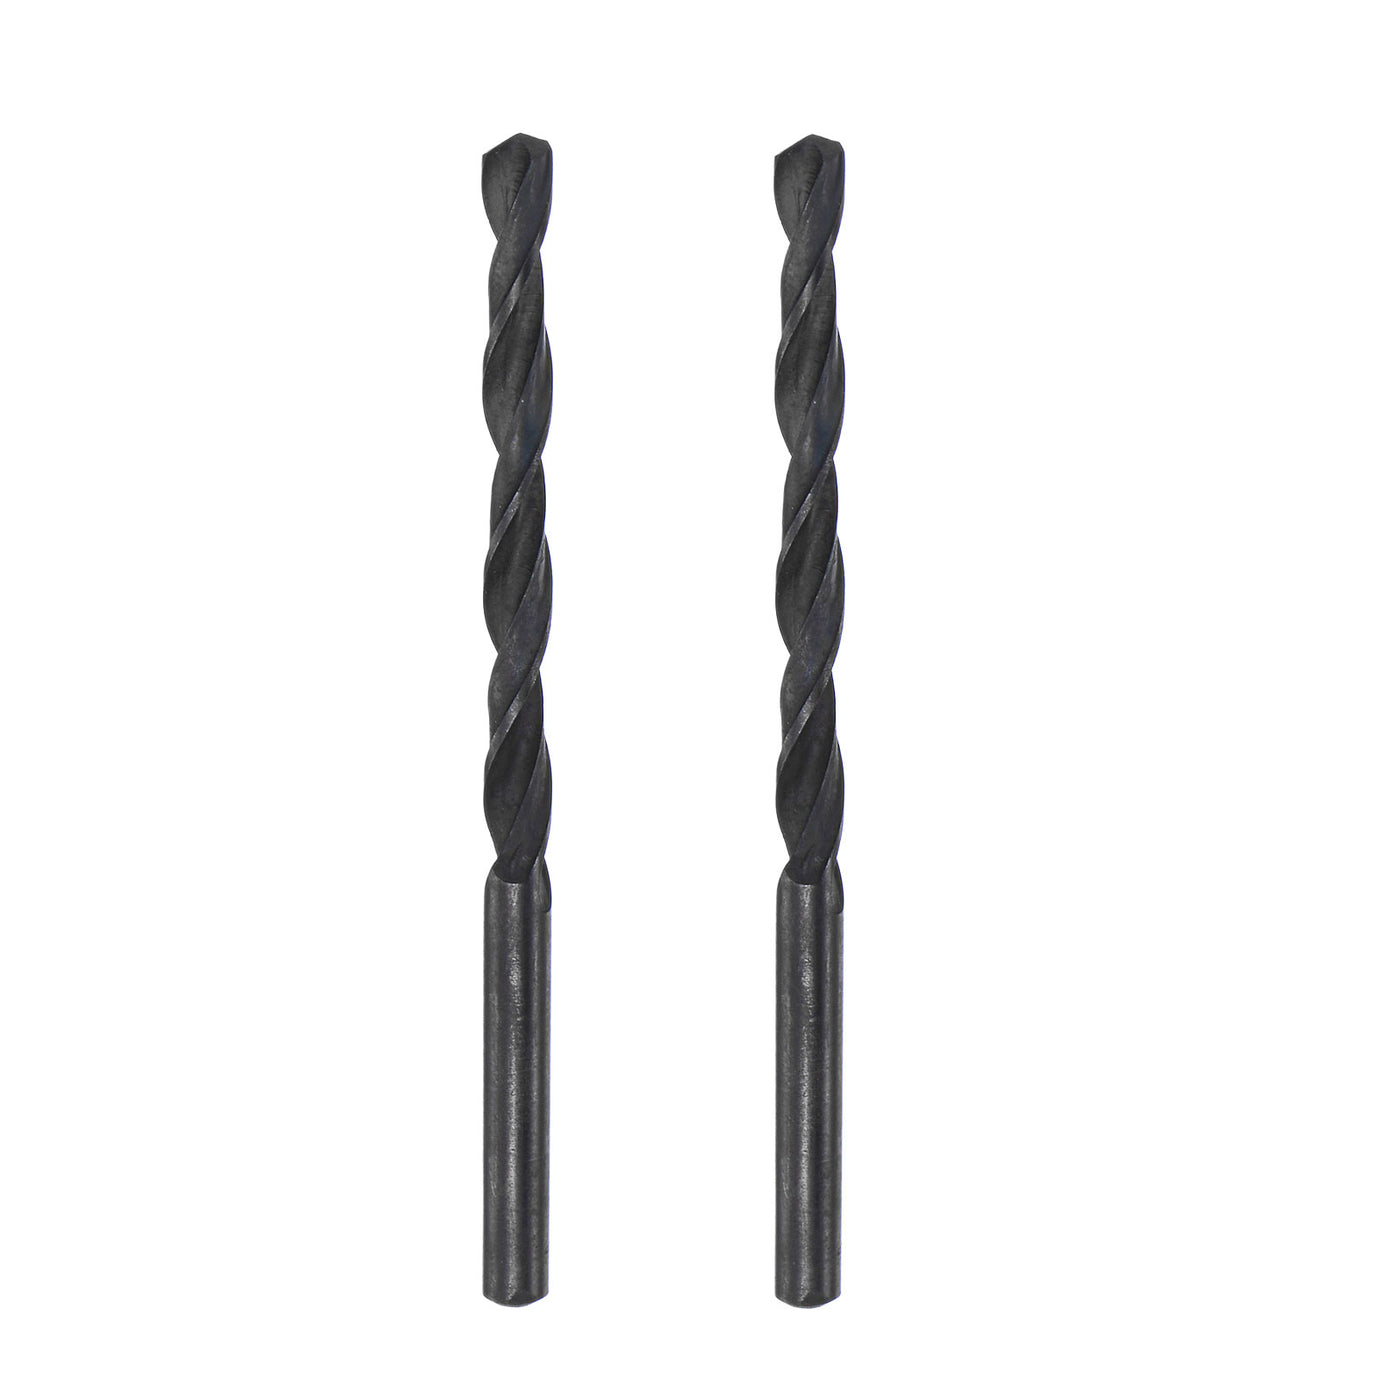 uxcell Uxcell High Speed Steel Twist Drill Bit, 4.6mm Fully Ground Black Oxide 80mm Long 2Pcs